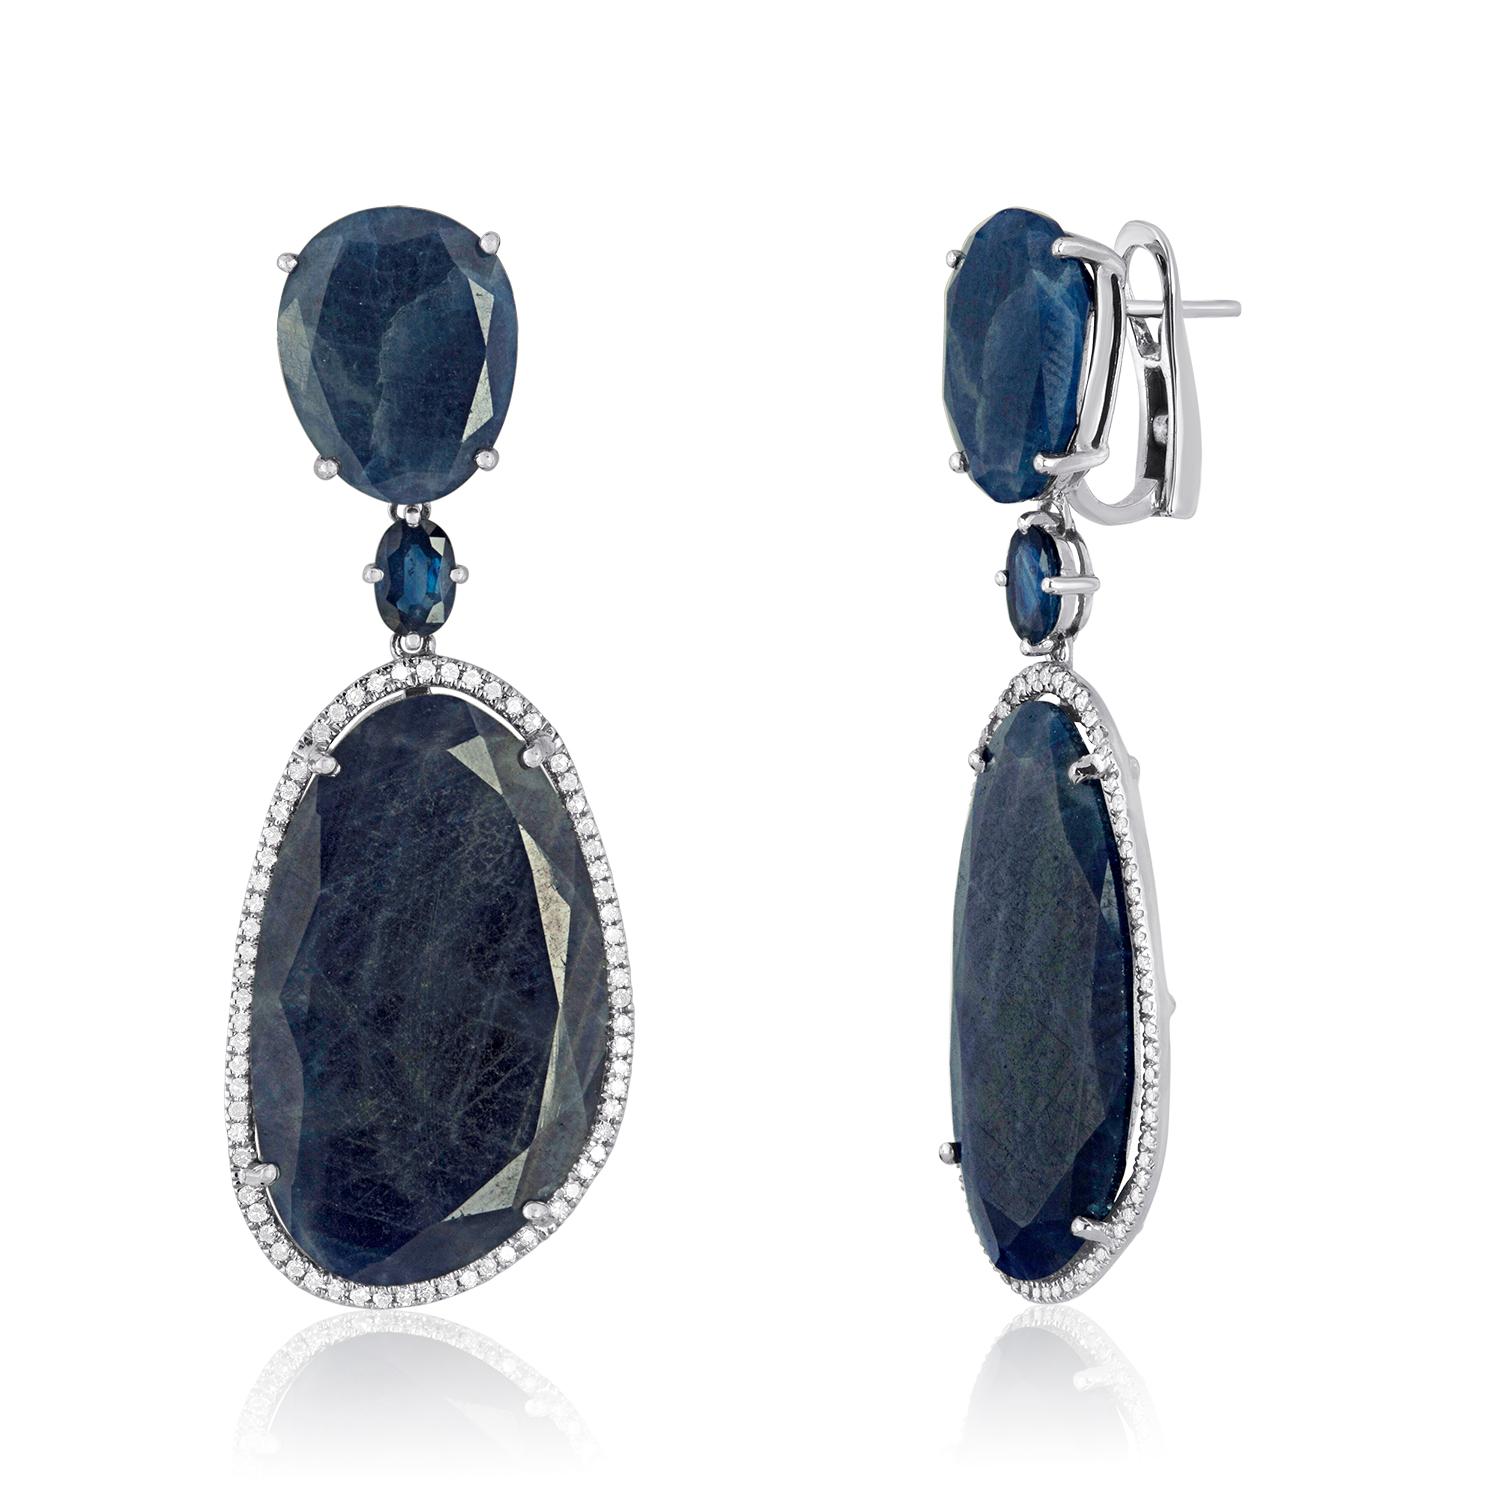 Sliced Sapphire Drop Earrings set in 14K White Gold surrounded by Diamonds 
Please note that there will be slight variations in each stone as all sapphire slices are natural.
82.61ct Natural Sapphires
0.54ct Diamonds
They measure 2